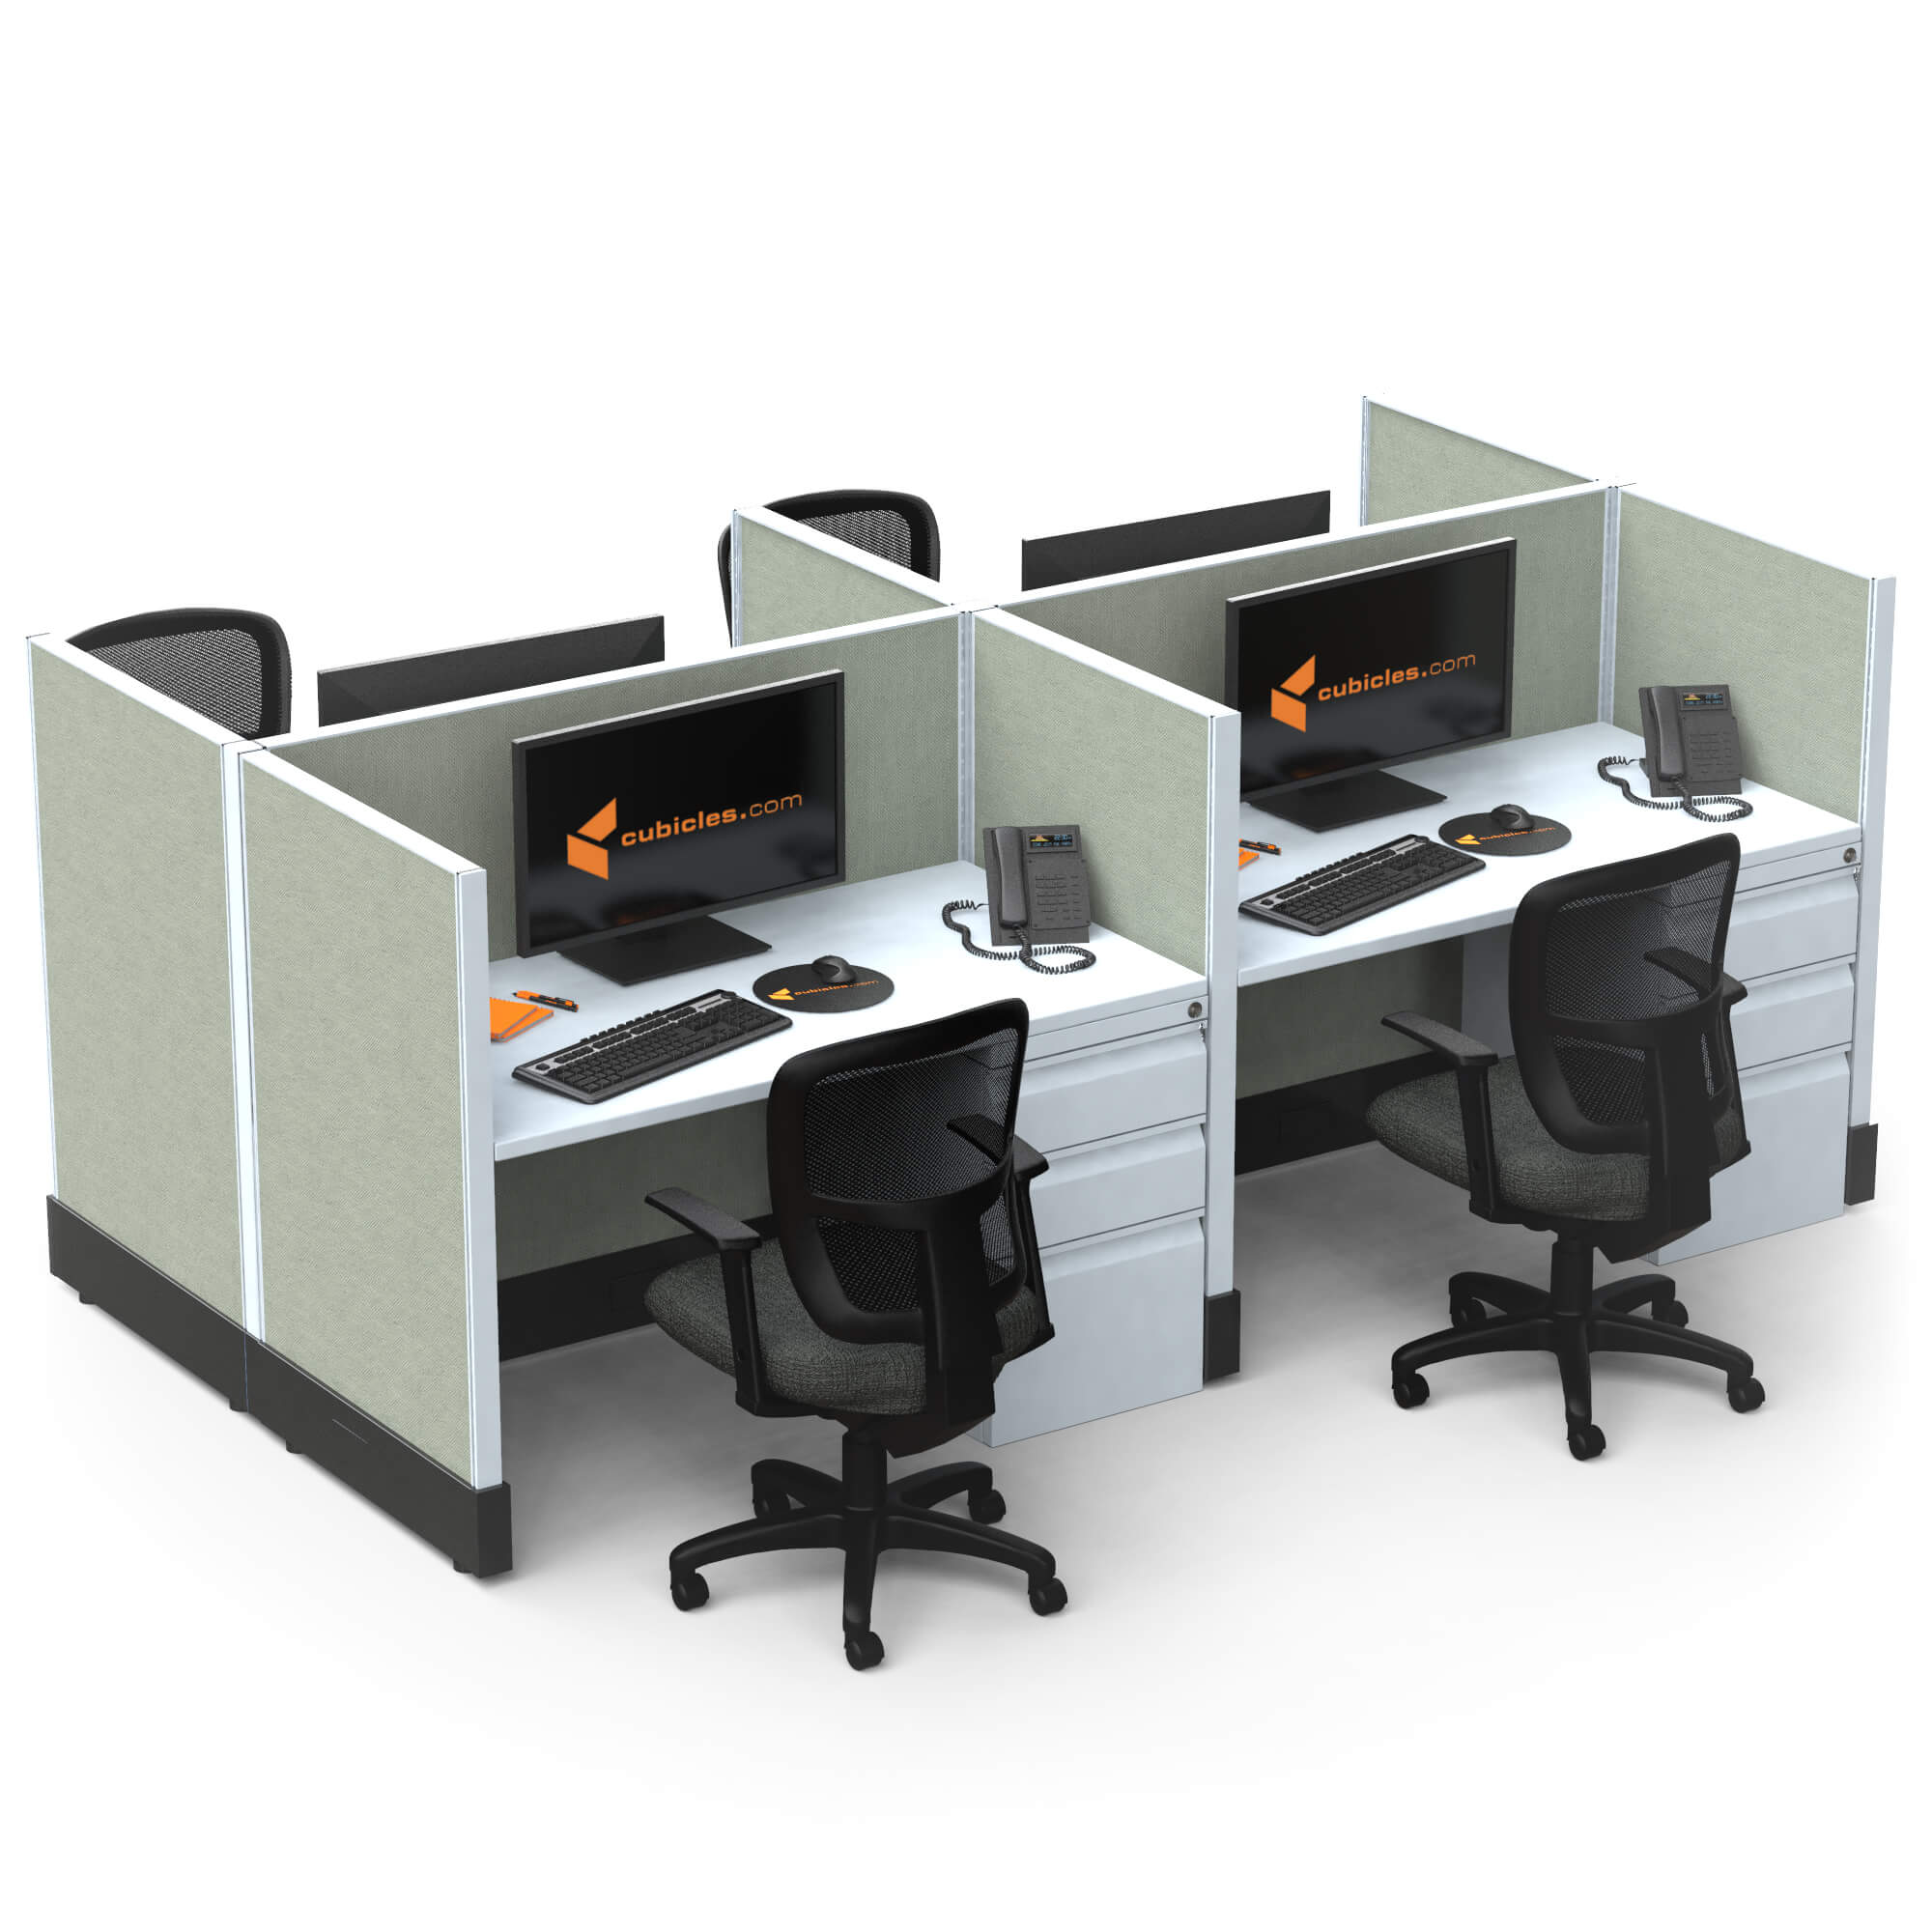 hot-desking-small-office-cubicles-4c-pack-1.jpg